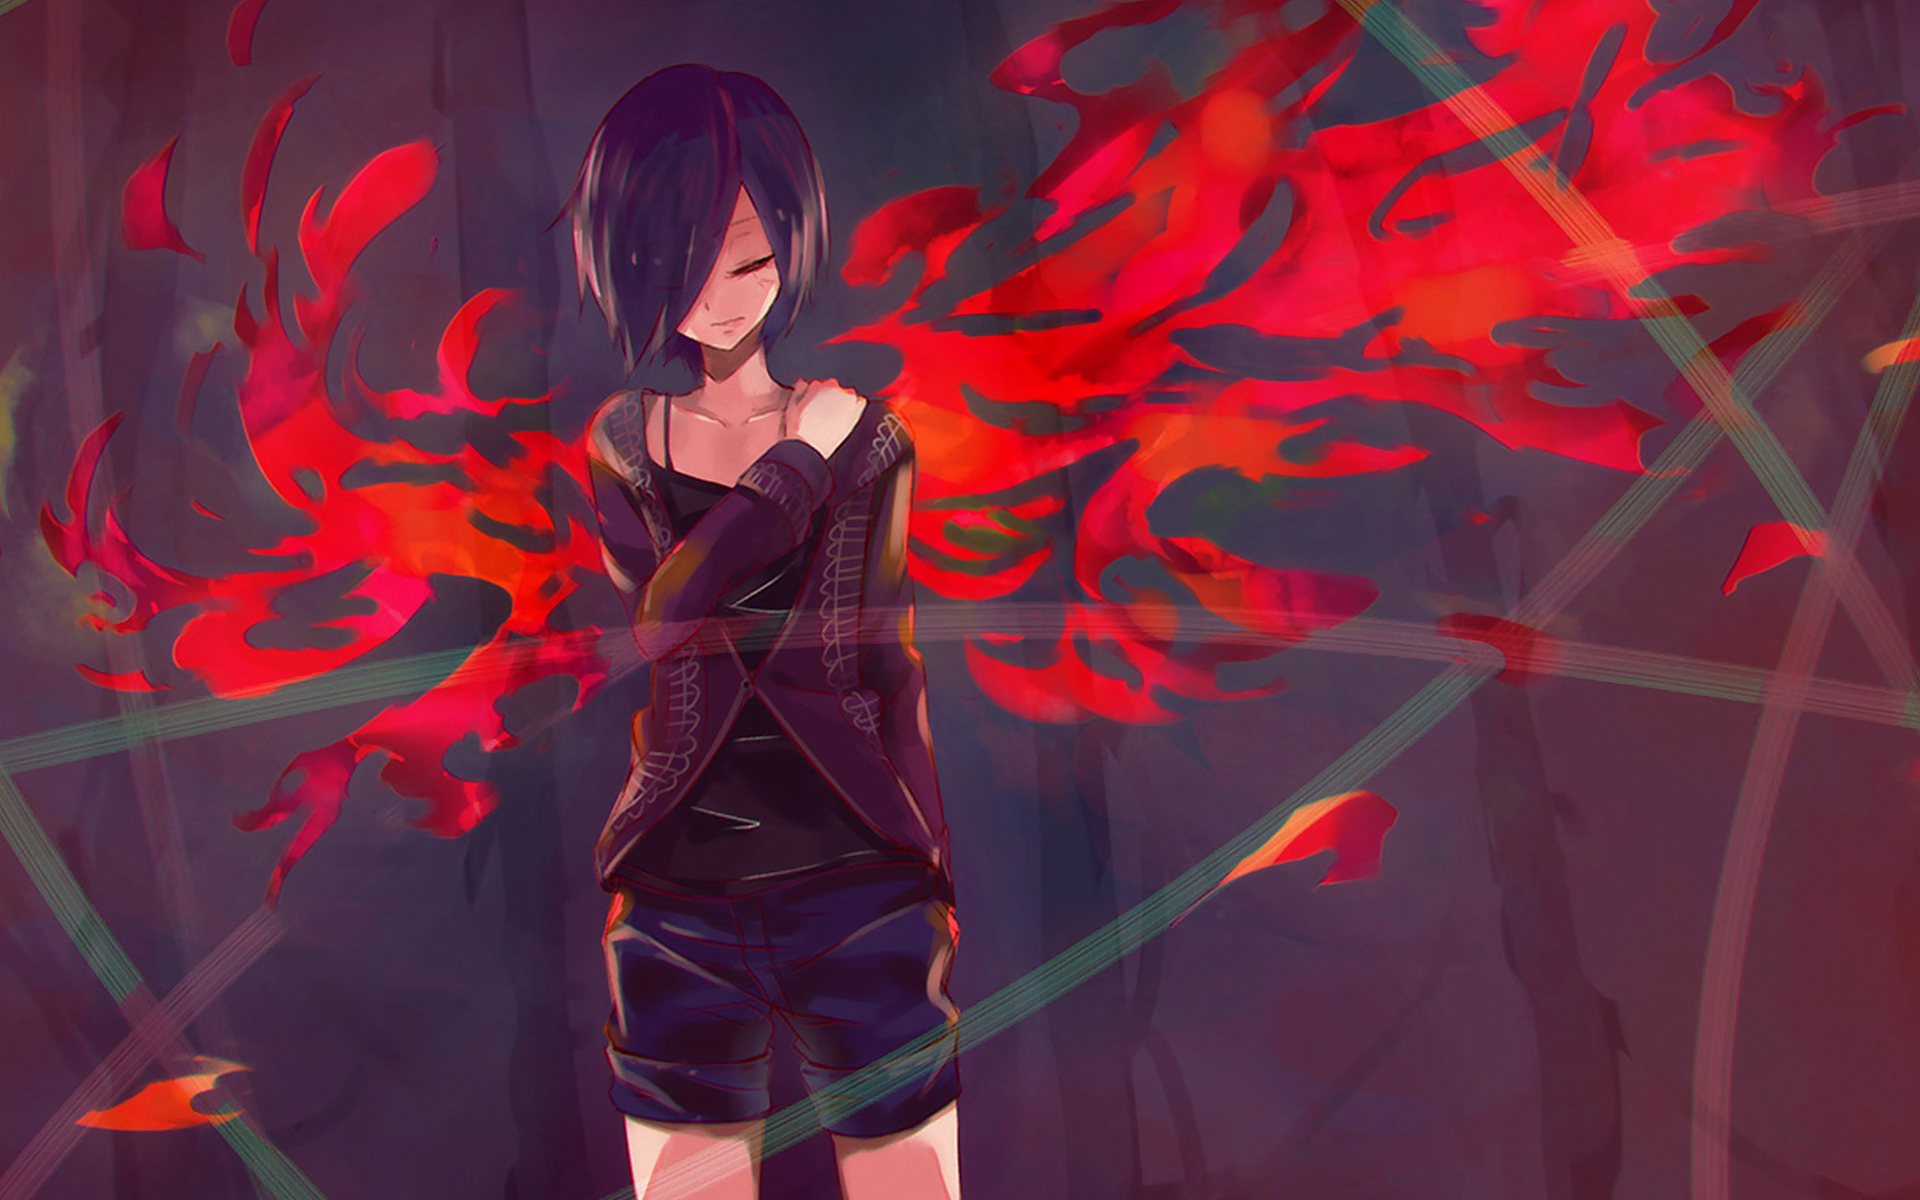 11 Anime Wallpaper Tokyo Ghoul Touka Images